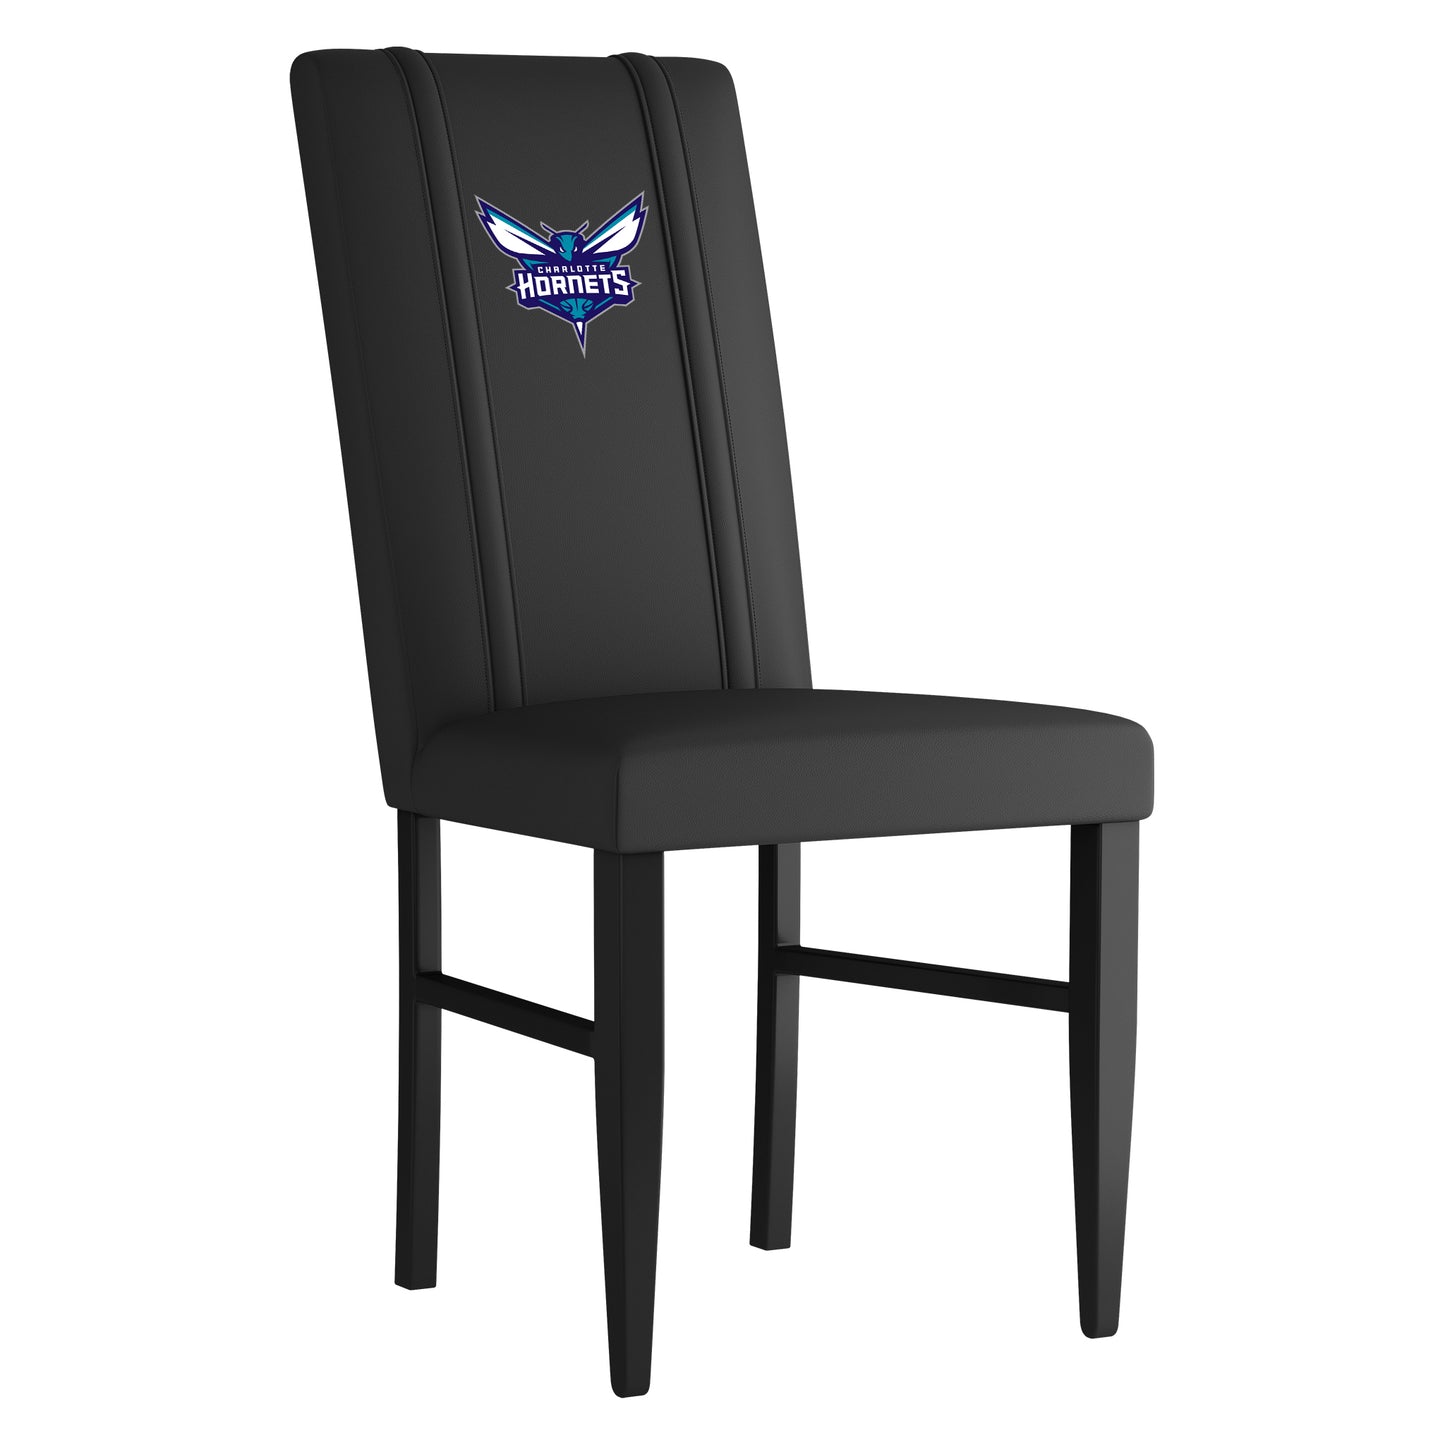 Side Chair 2000 with Charlotte Hornets Primary Set of 2